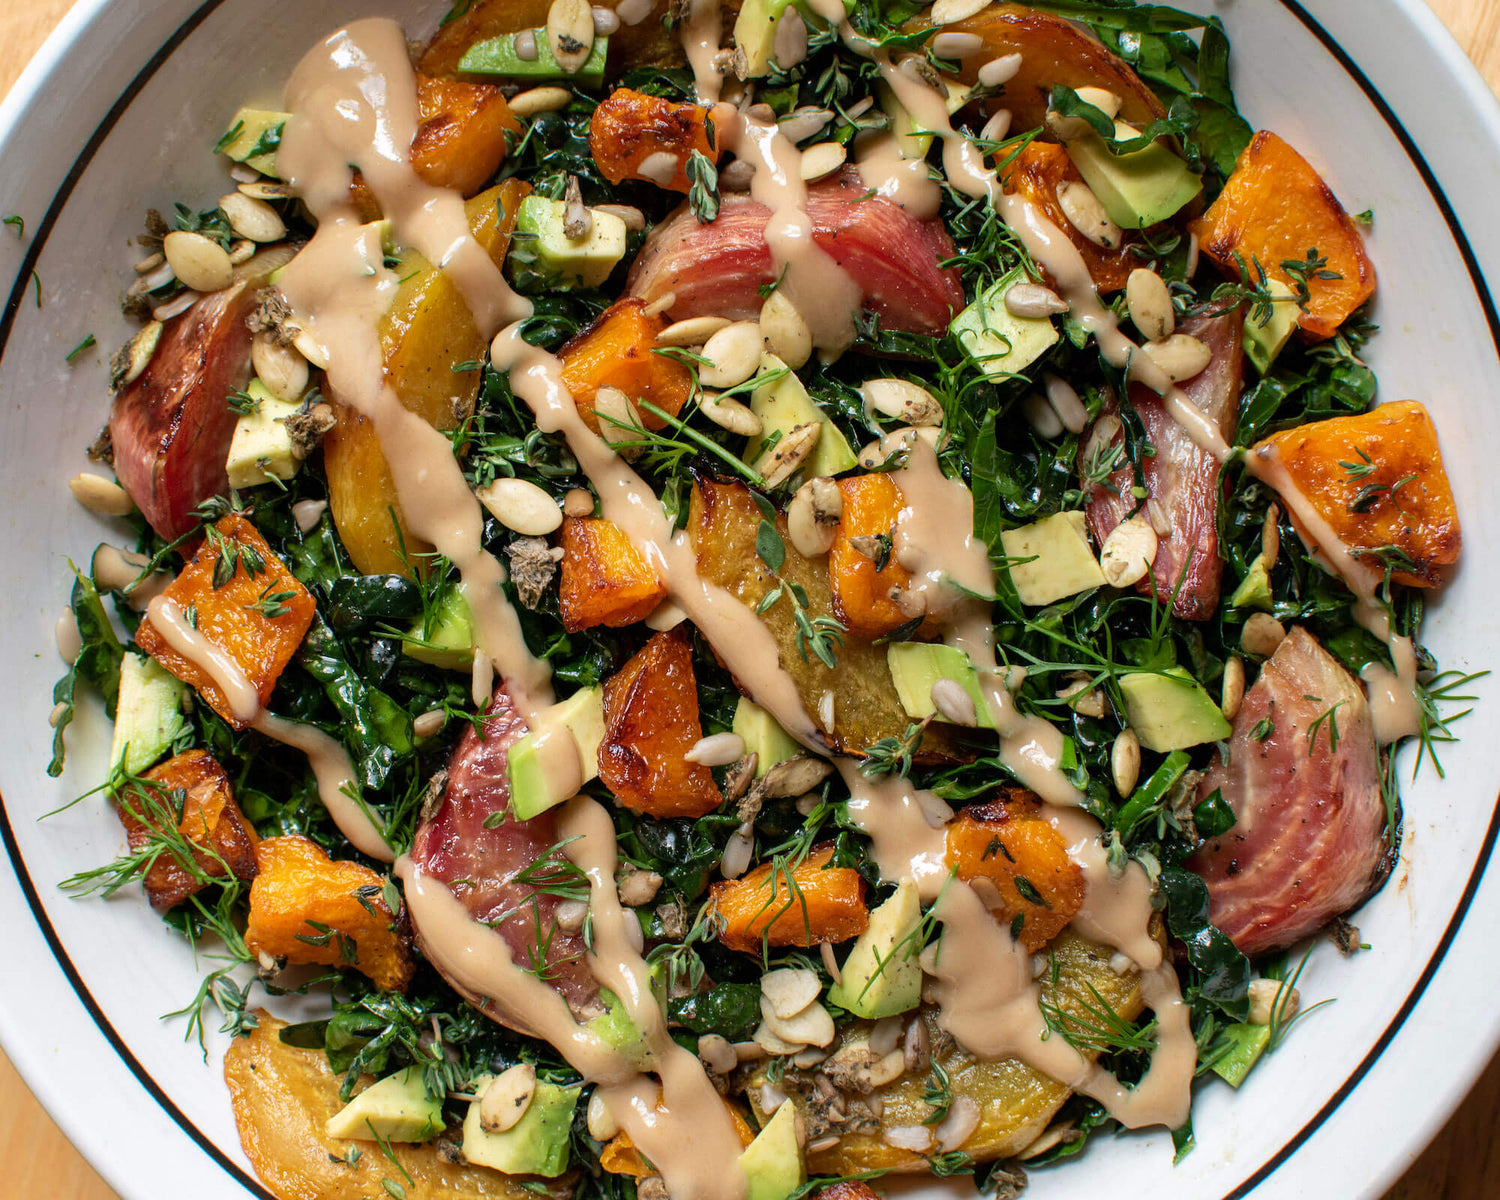 Kale Salad with Roasted Beets, Butternut Squash, and Go Raw Salad Toppers